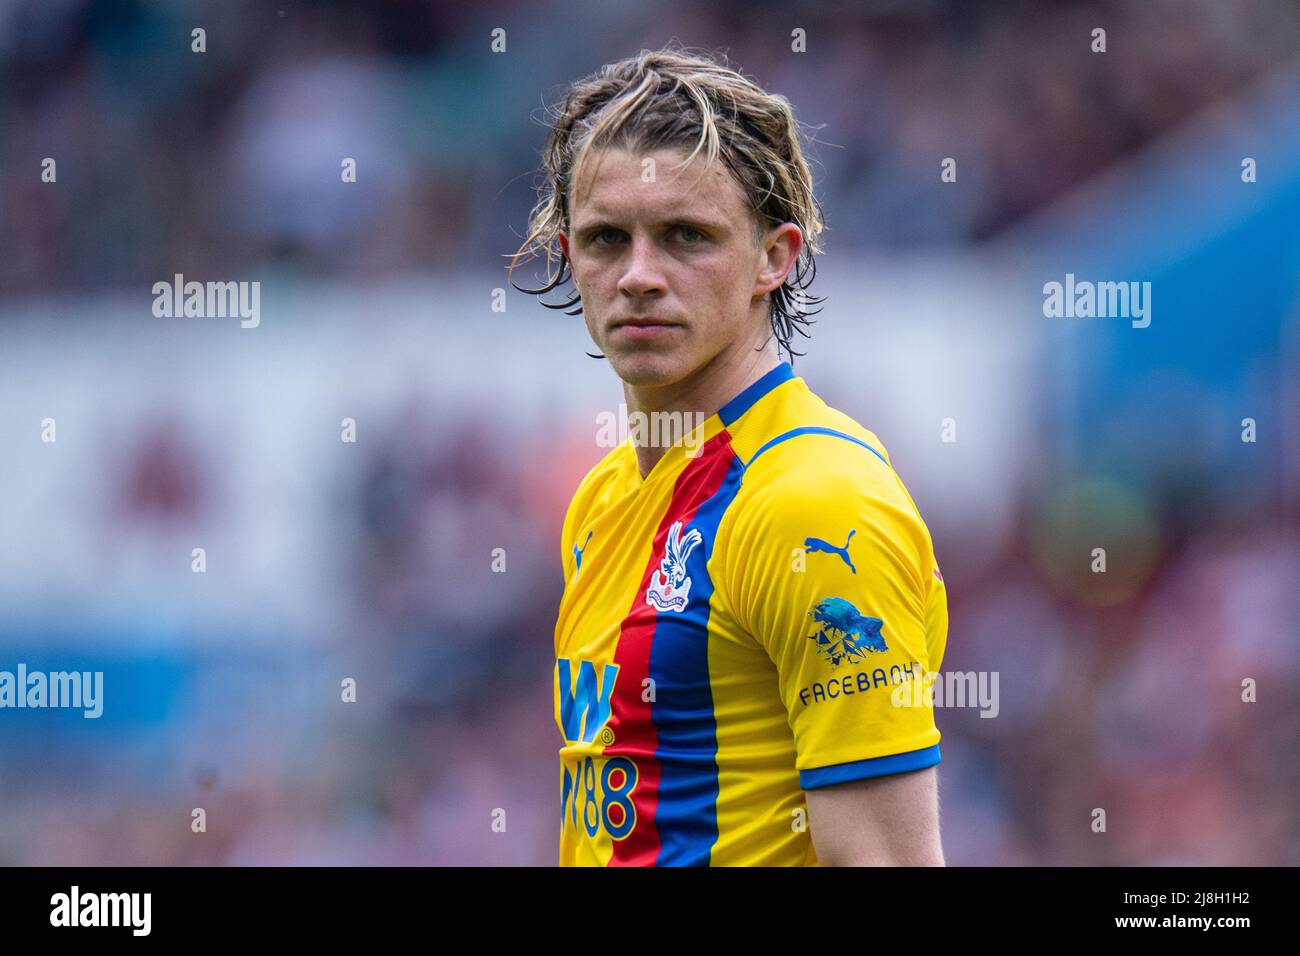 BIRMINGHAM, ENGLAND - MAY 15: Conor Gallagher looks on during the Premier League match between Aston Villa and Crystal Palace at Villa Park on May 15, Stock Photo